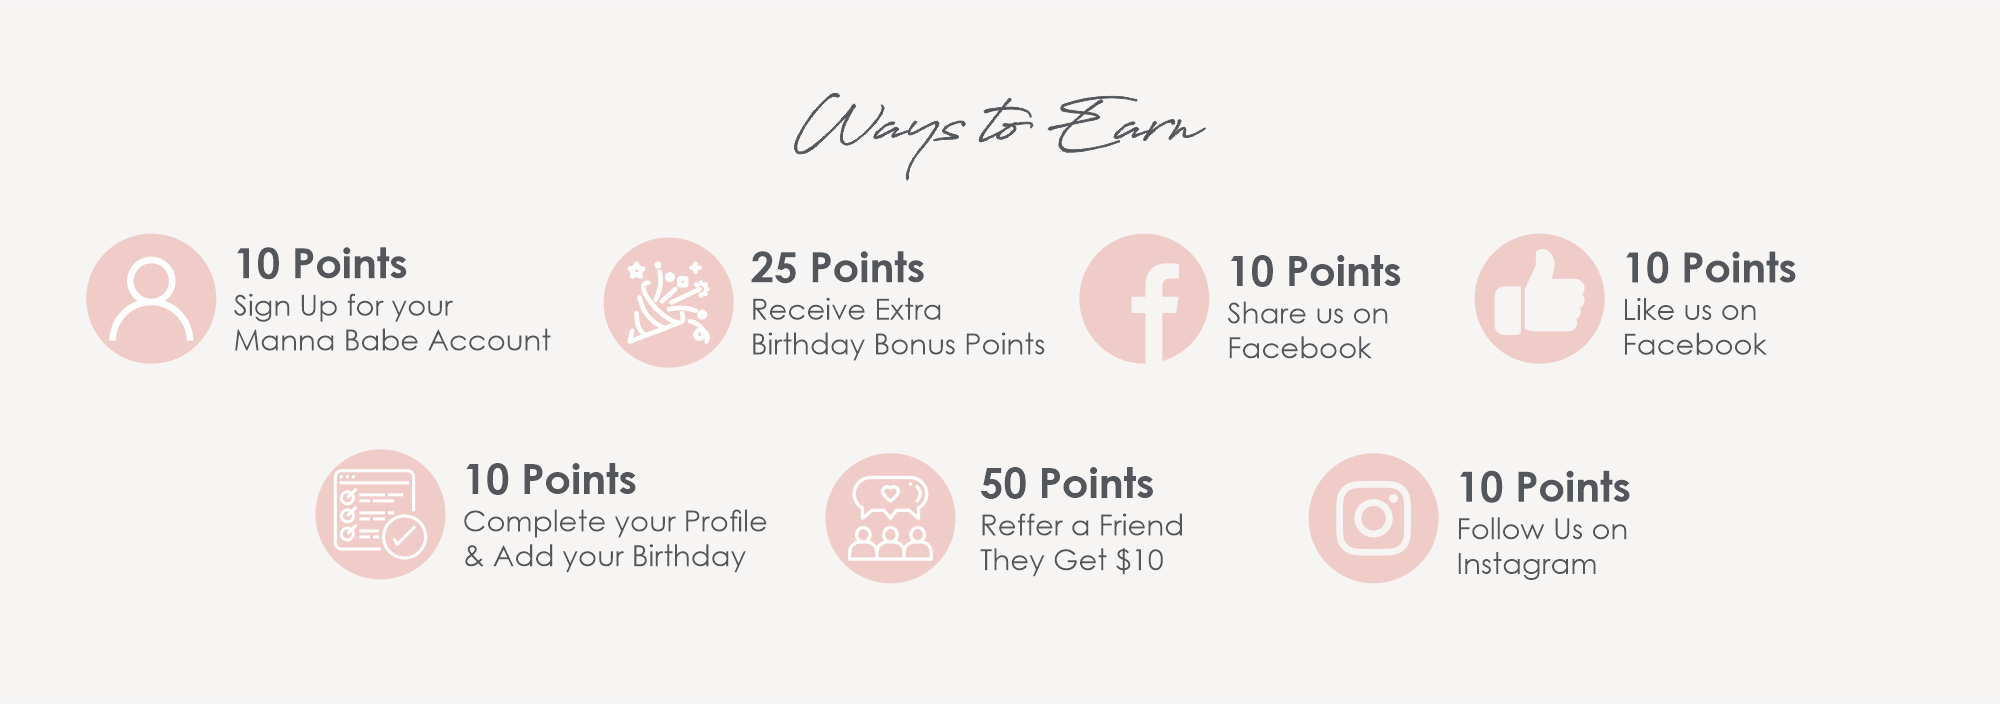 Ways to Earn: 10 Points for Signing up, 25 Points on your Birthday, 10 Points for Shares on Facebook, 10 Points for Facebook like, 10 Points to complete your profile and add Birthday, 50 Points to Referr a Friend, and 10 Points to follow us on Instagram